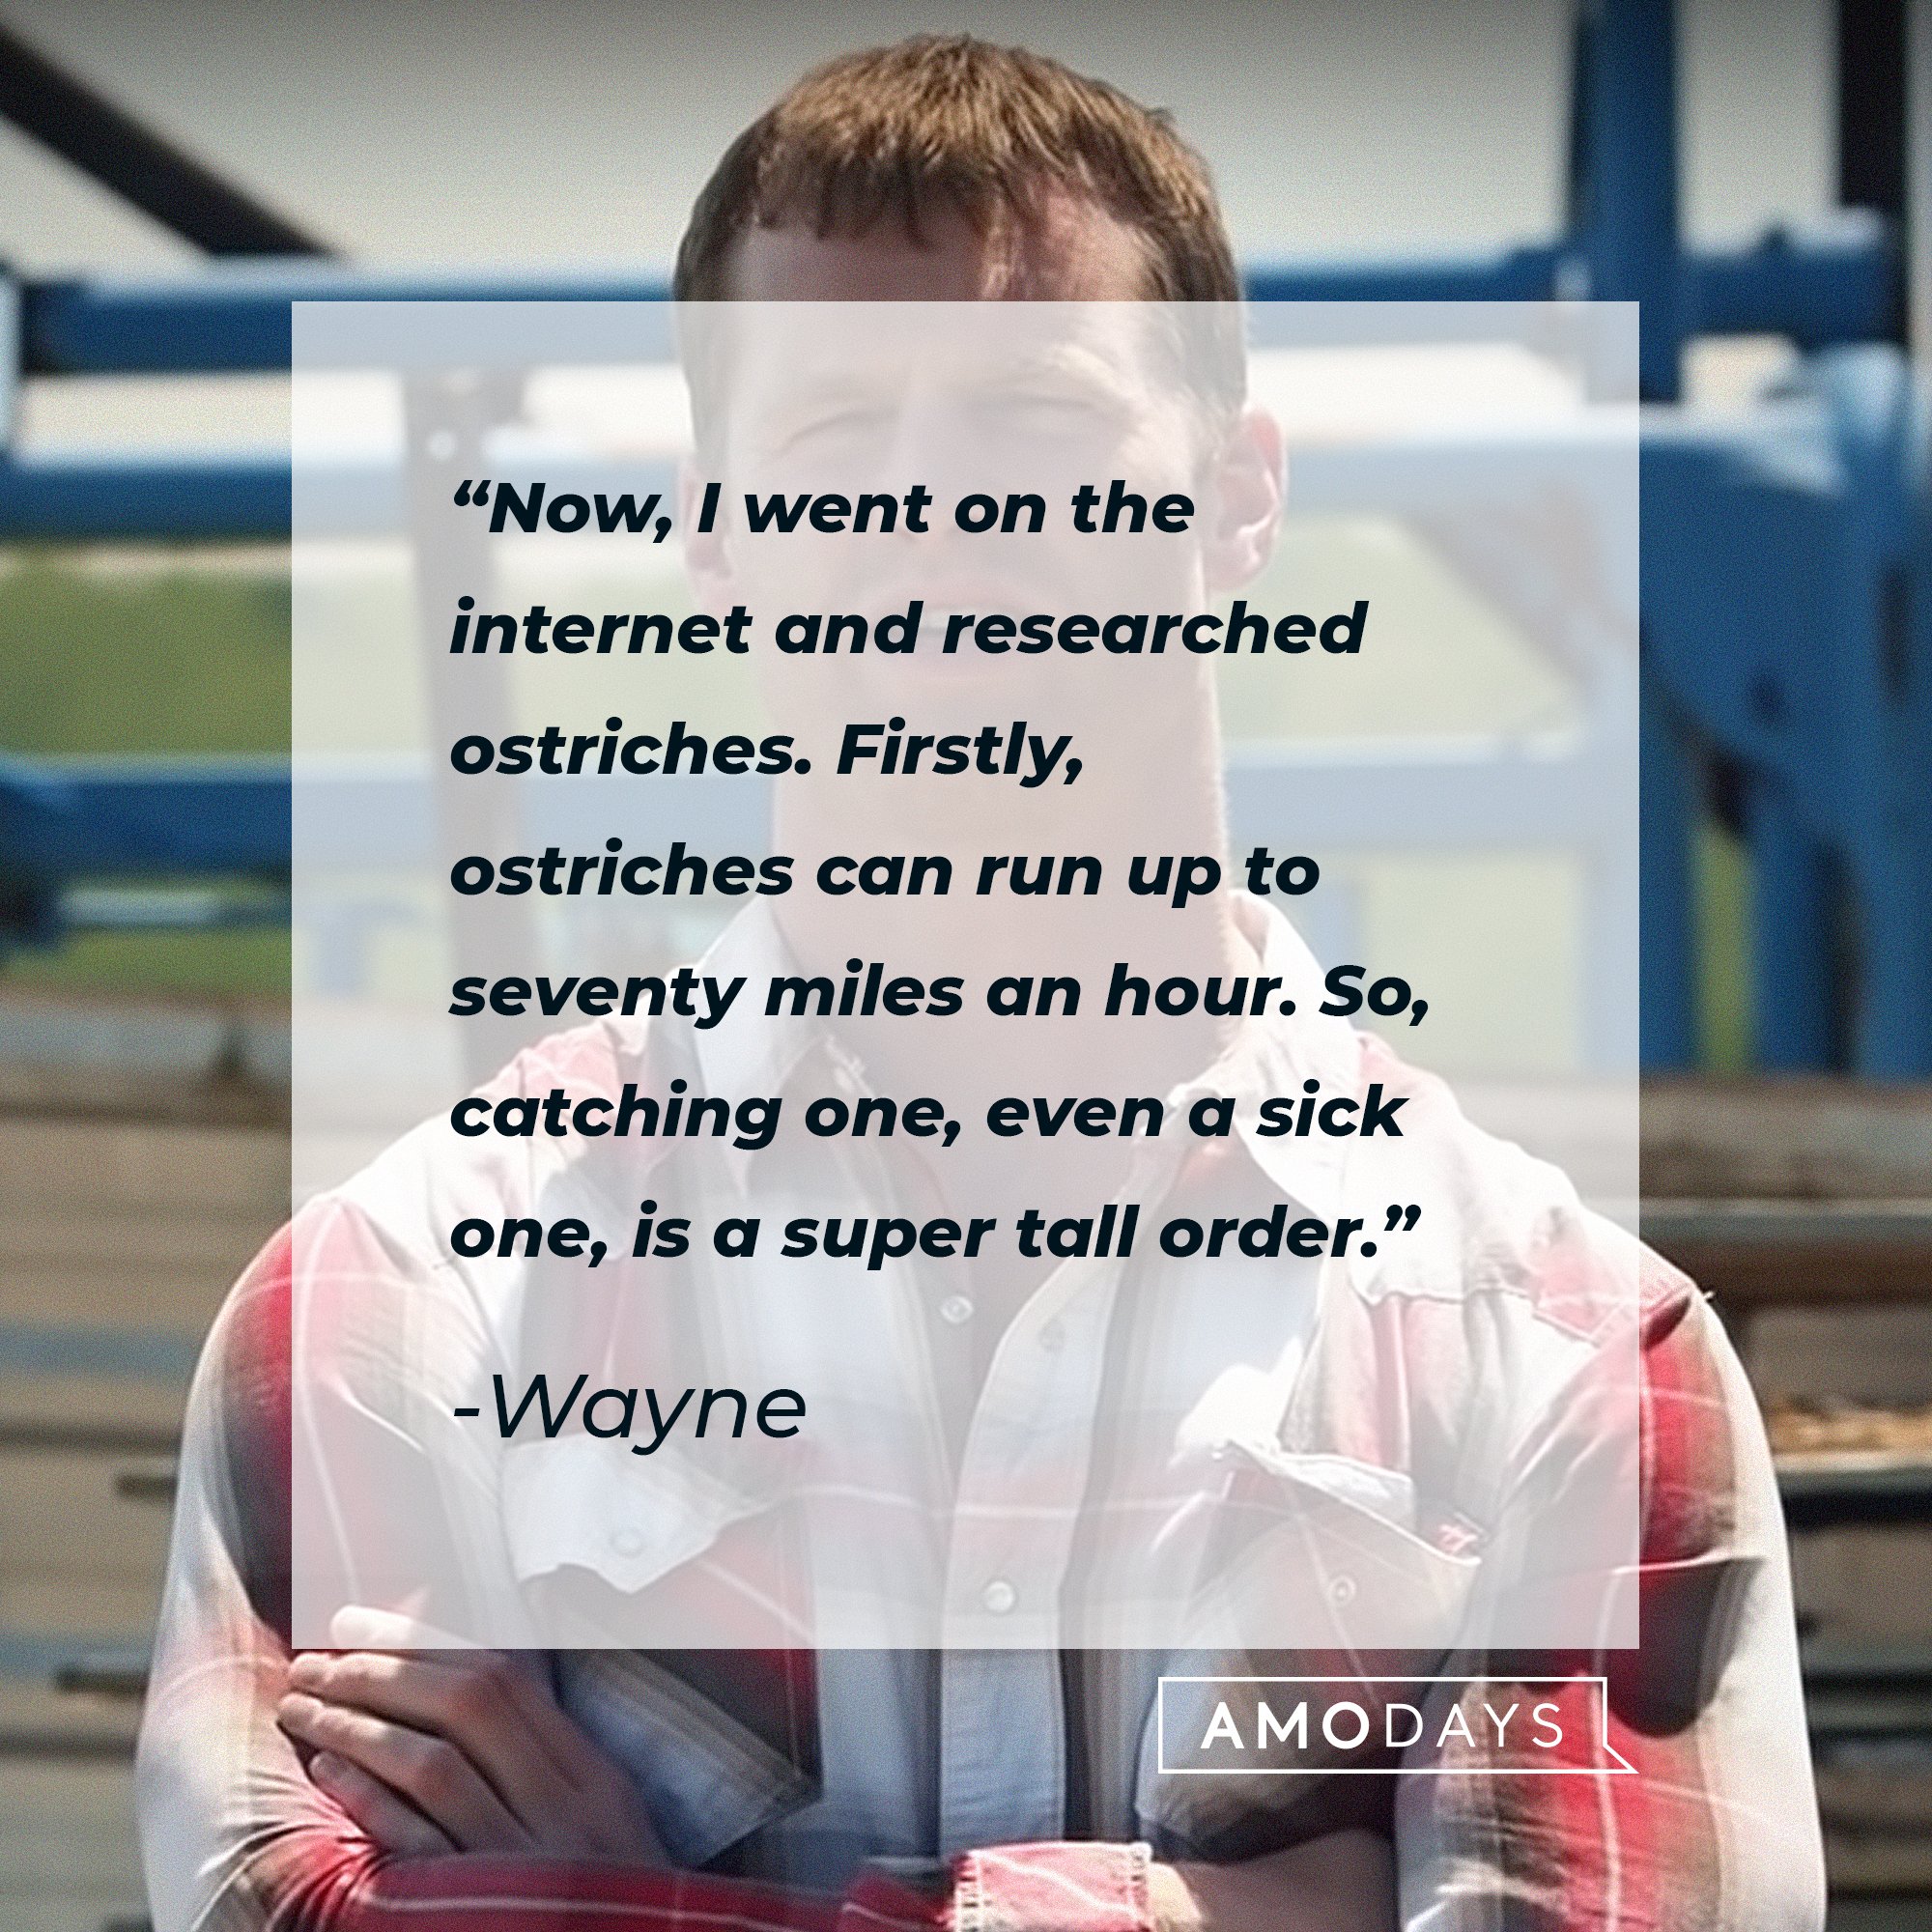 Wayne’s quote: “Now, I went on the internet and researched ostriches. Firstly, ostriches can run up to seventy miles an hour. So, catching one, even a sick one, is a super tall order.” | Image: AmoDays